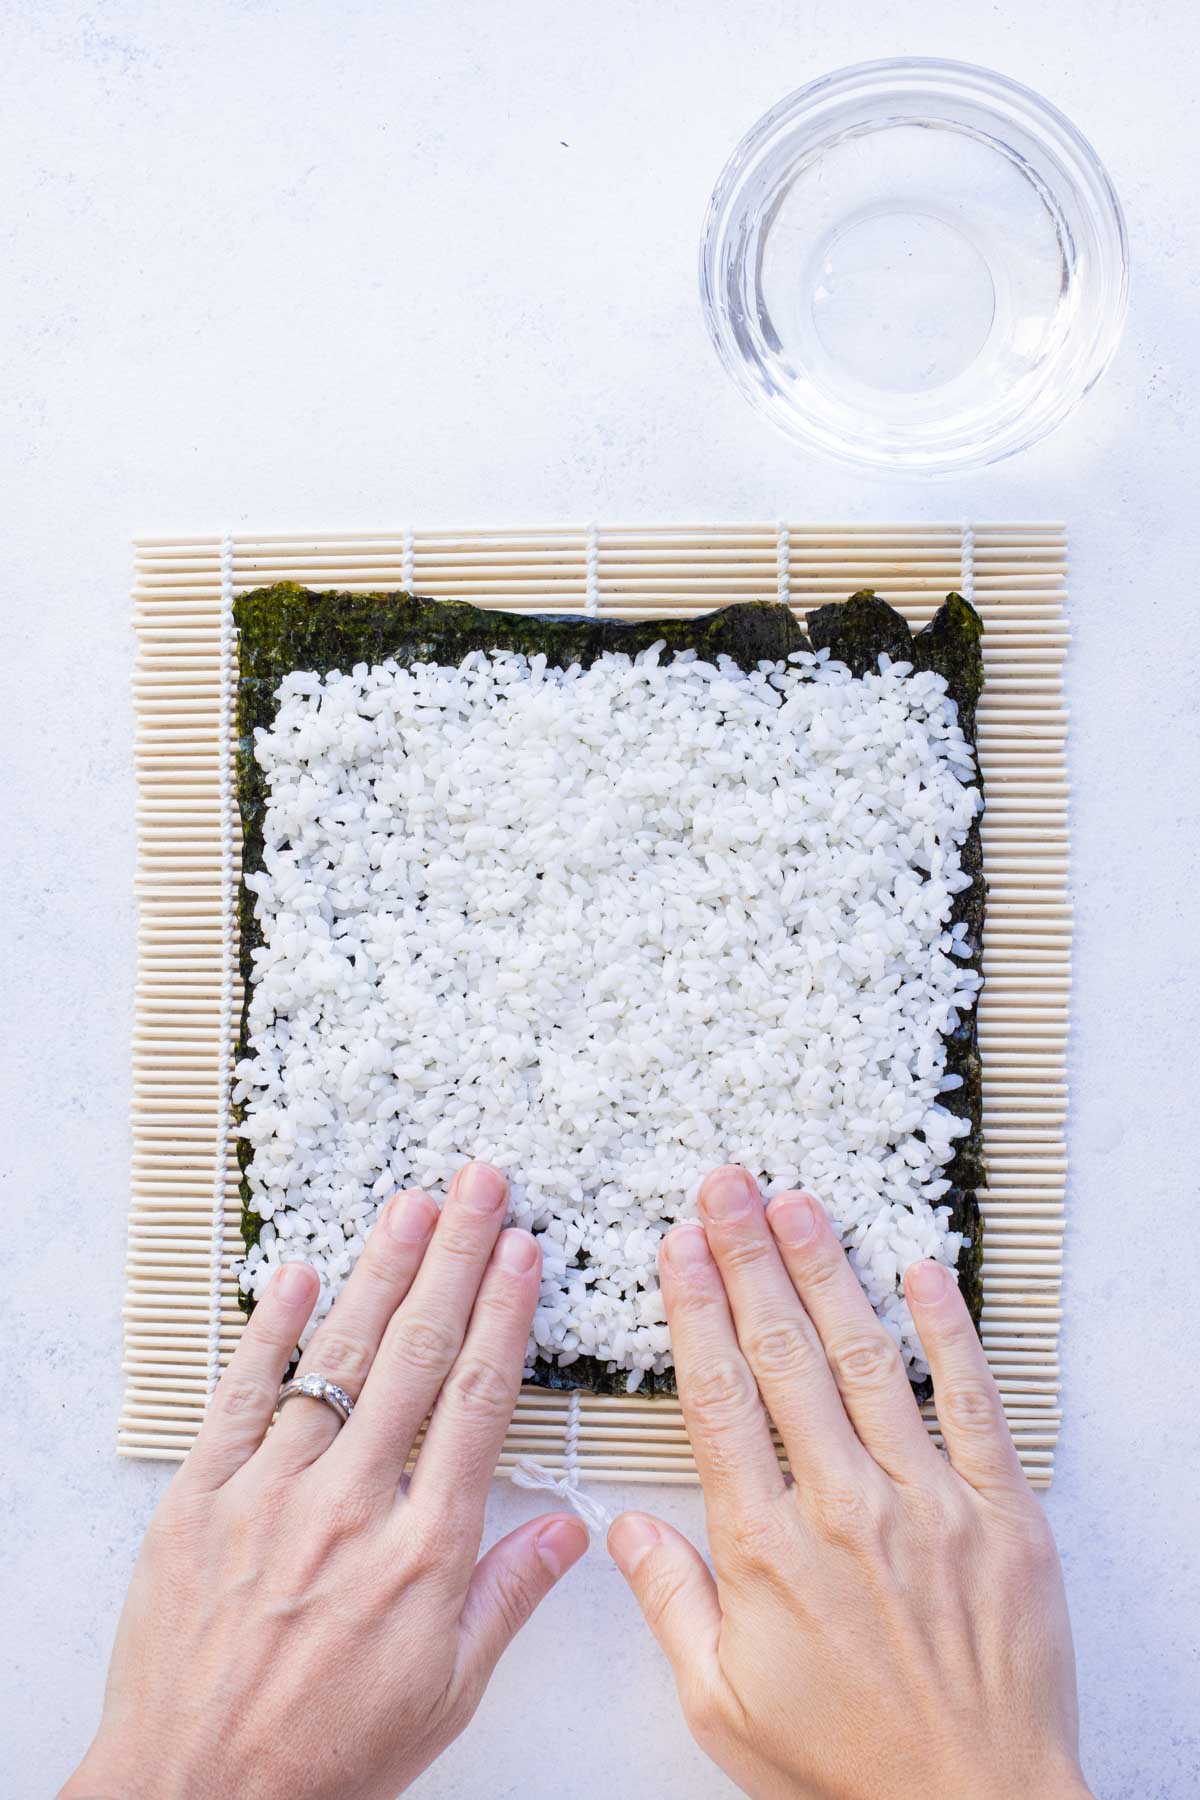 Remaining rice is spread out with your fingers over the whole nori sheet.